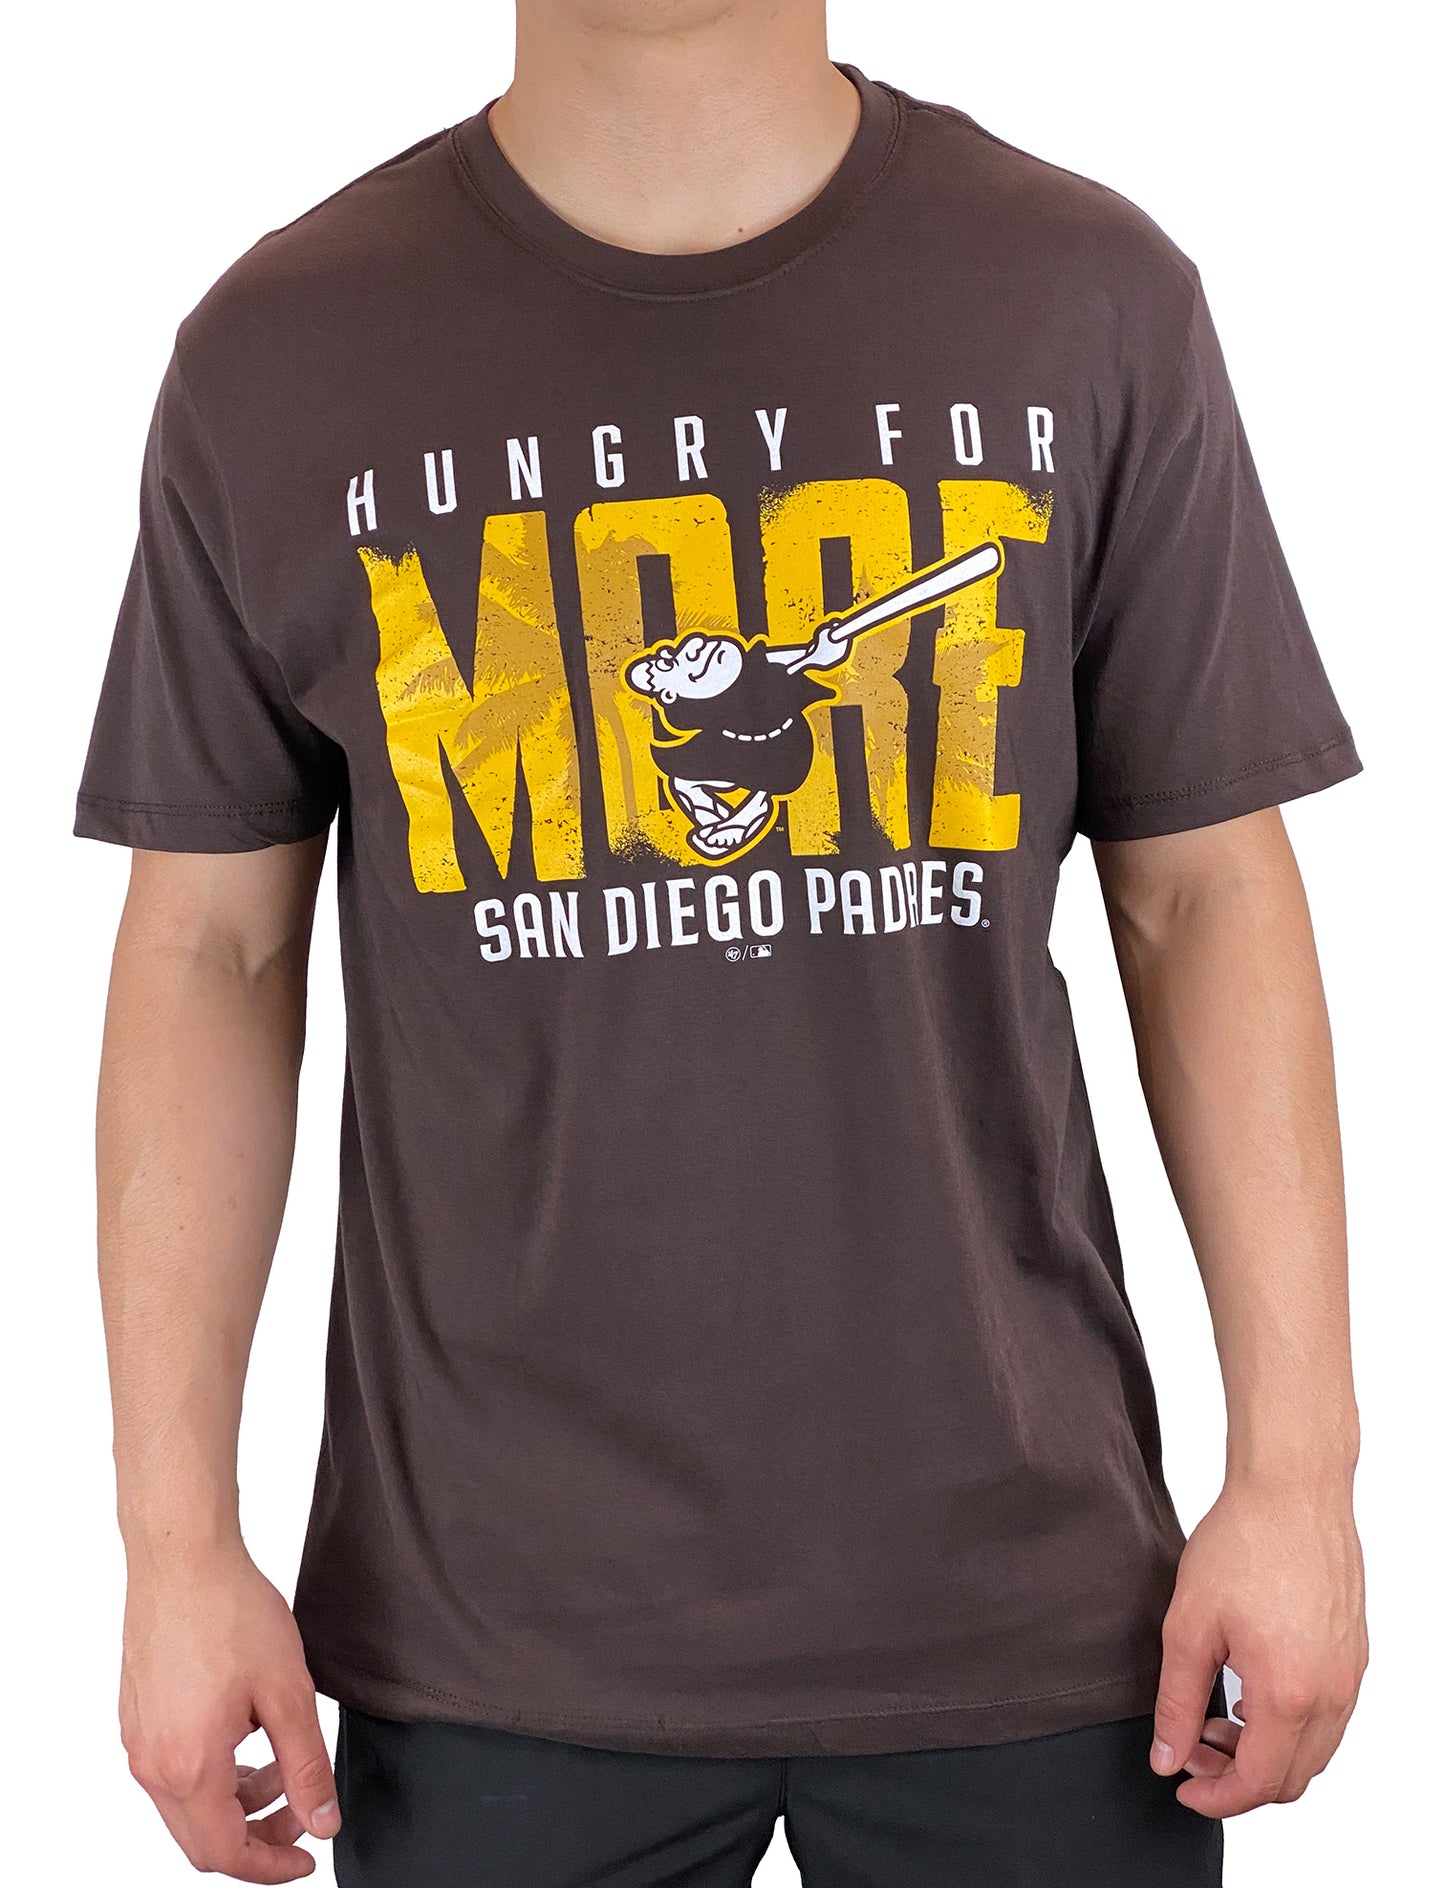 Men's San Diego Padres Gear, Mens Padres Apparel, Guys Clothes